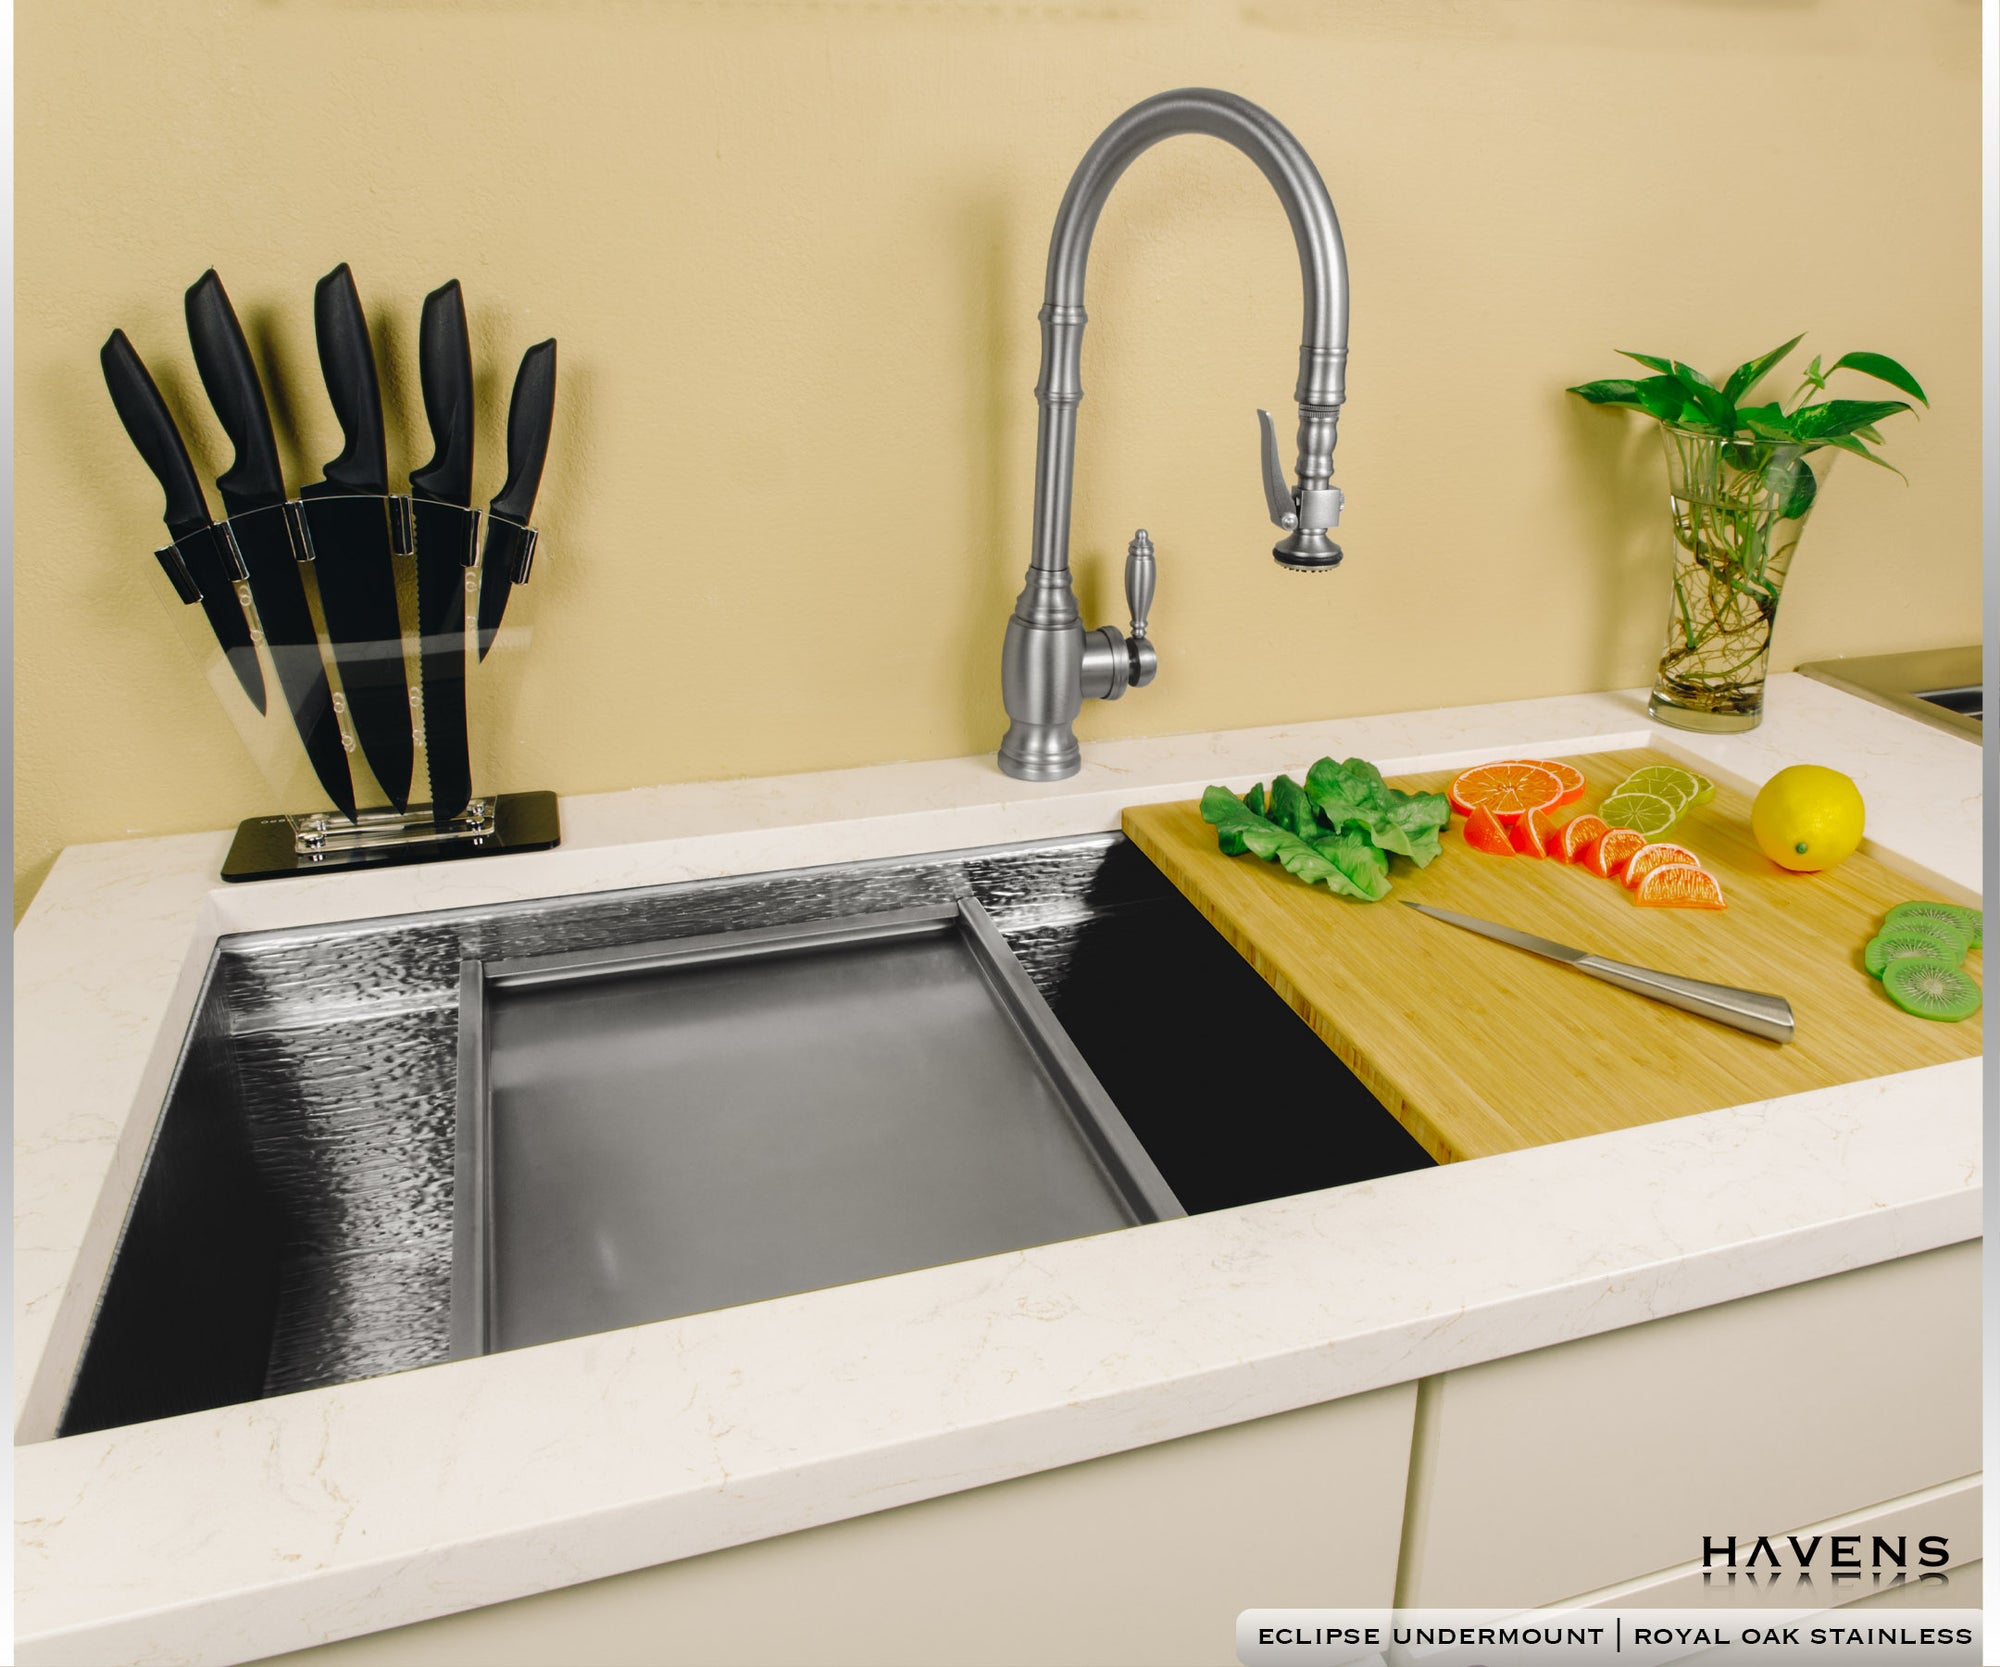 Custom Eclipse Dual-Tier Sink - Stainless - Havens